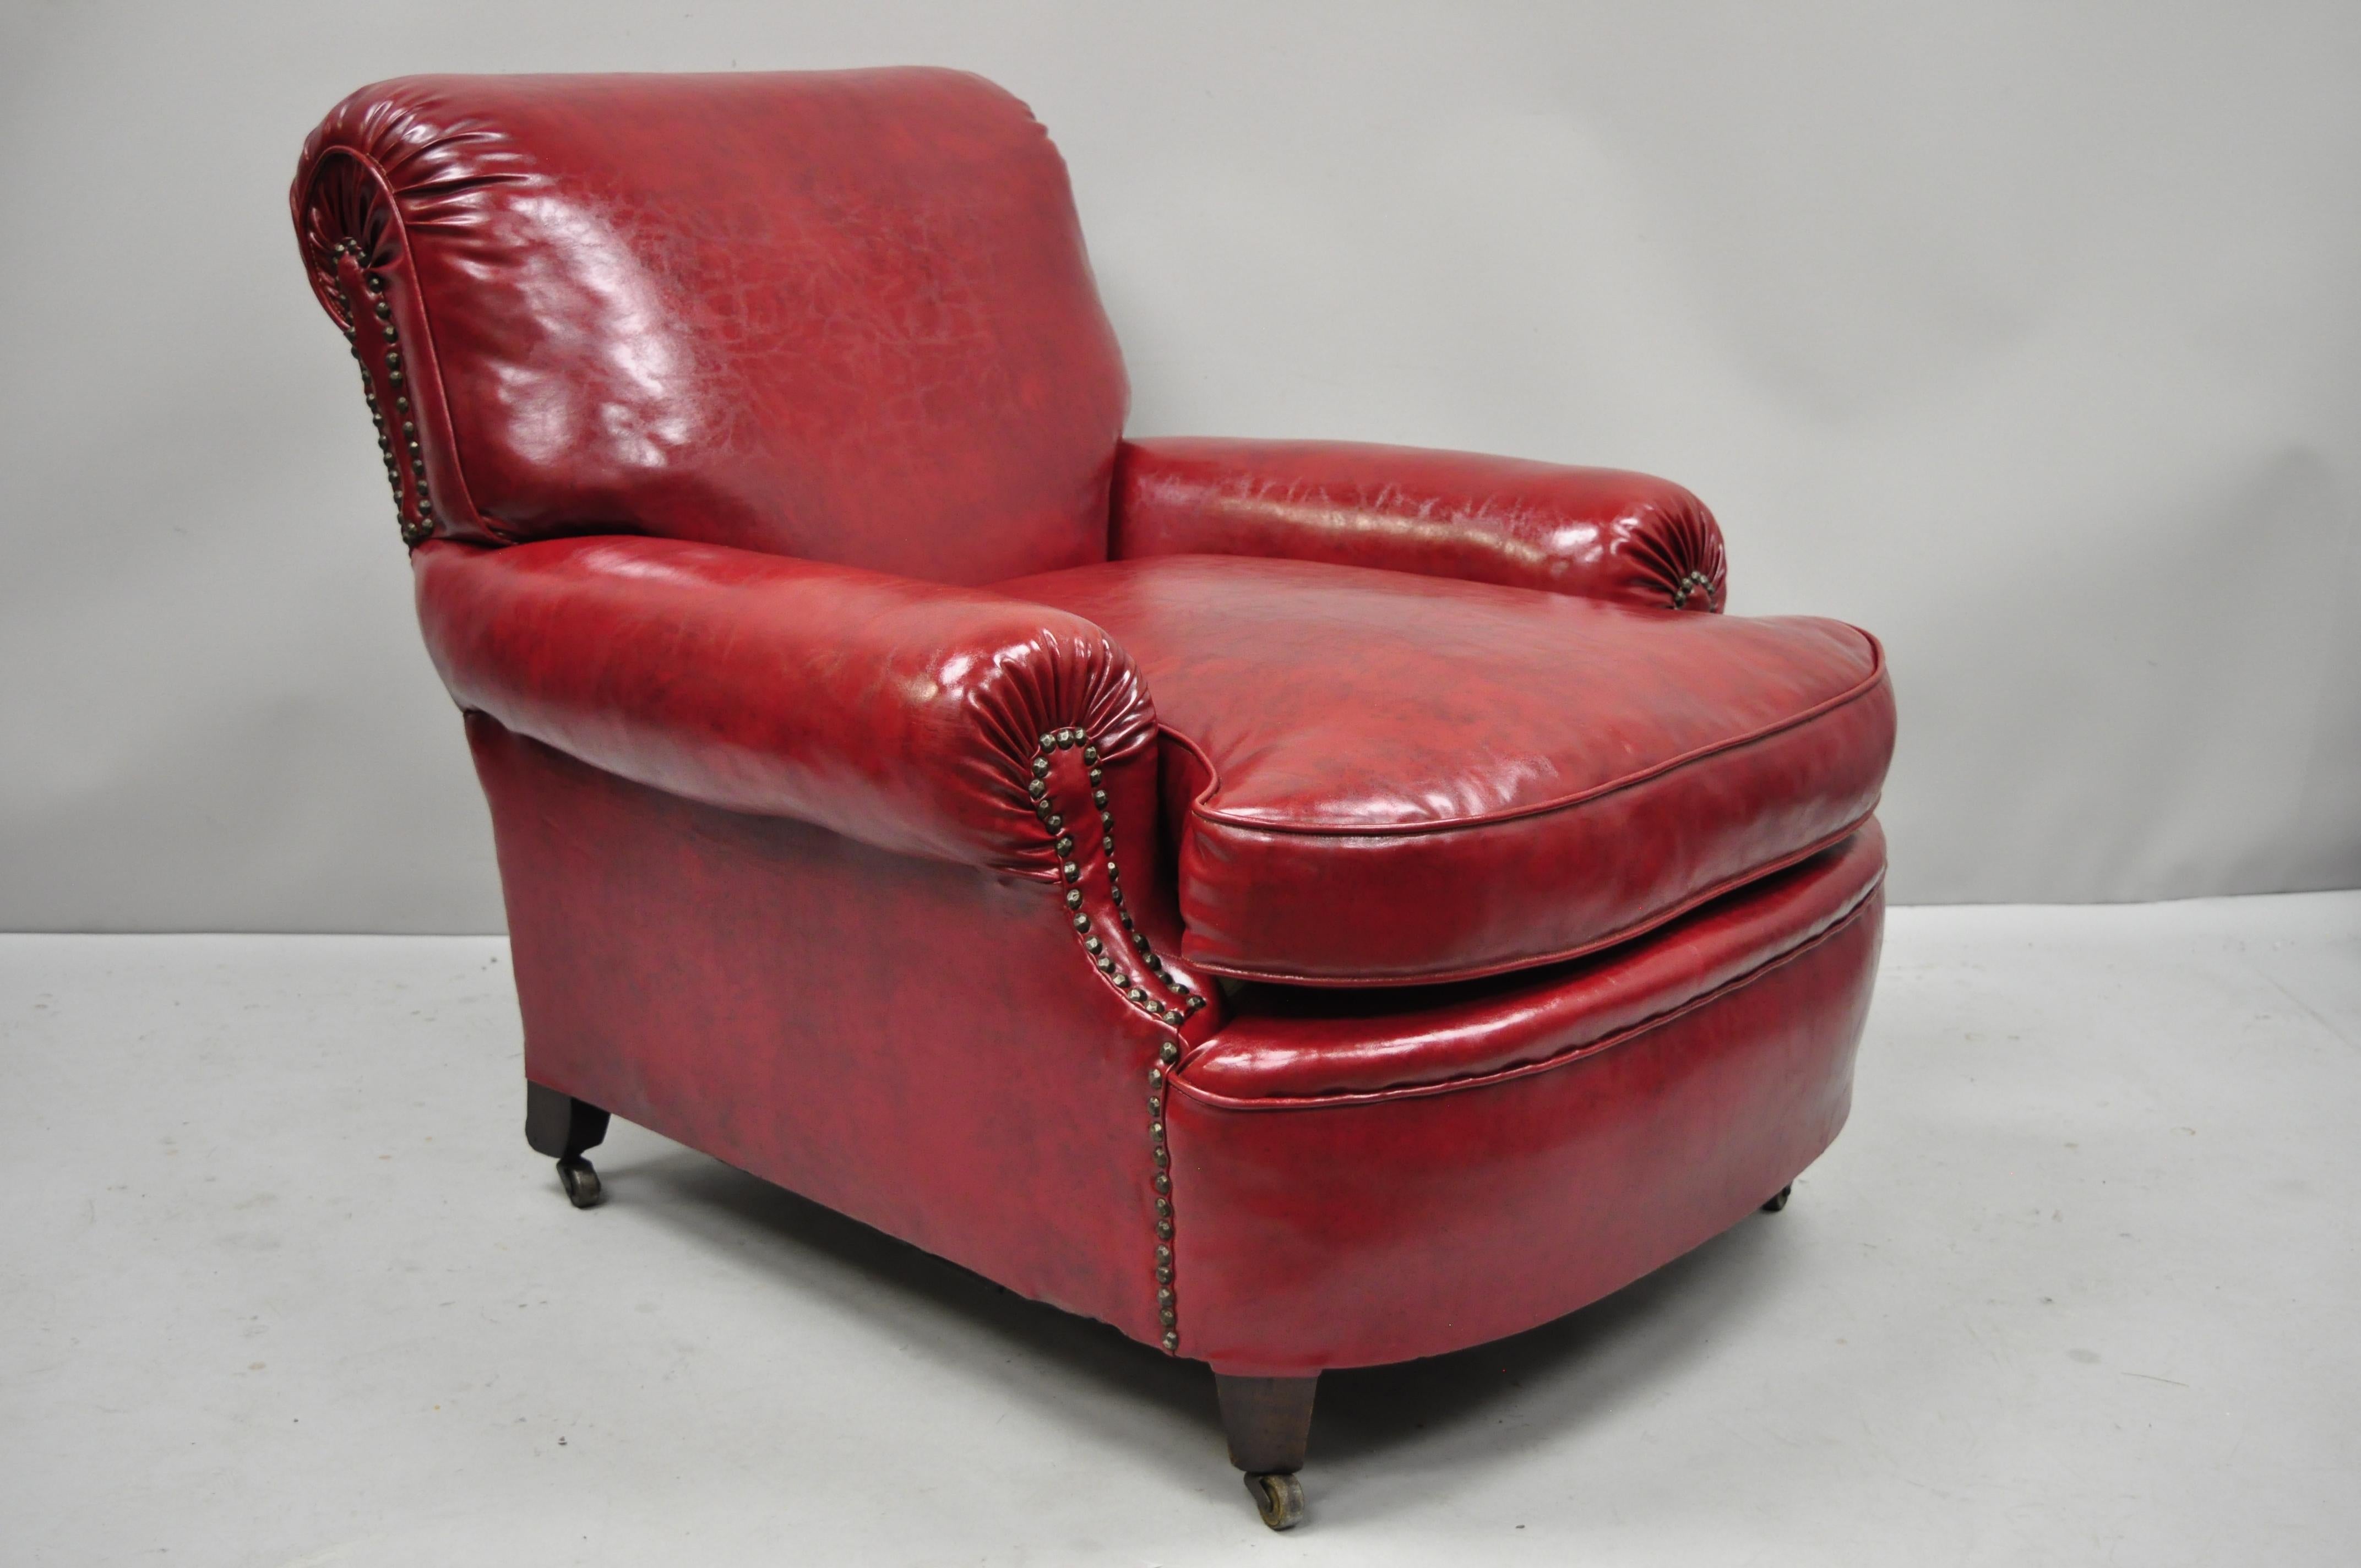 Antique English Regency Style Burgundy Red Vinyl Faux Leather Club Lounge Chair 3